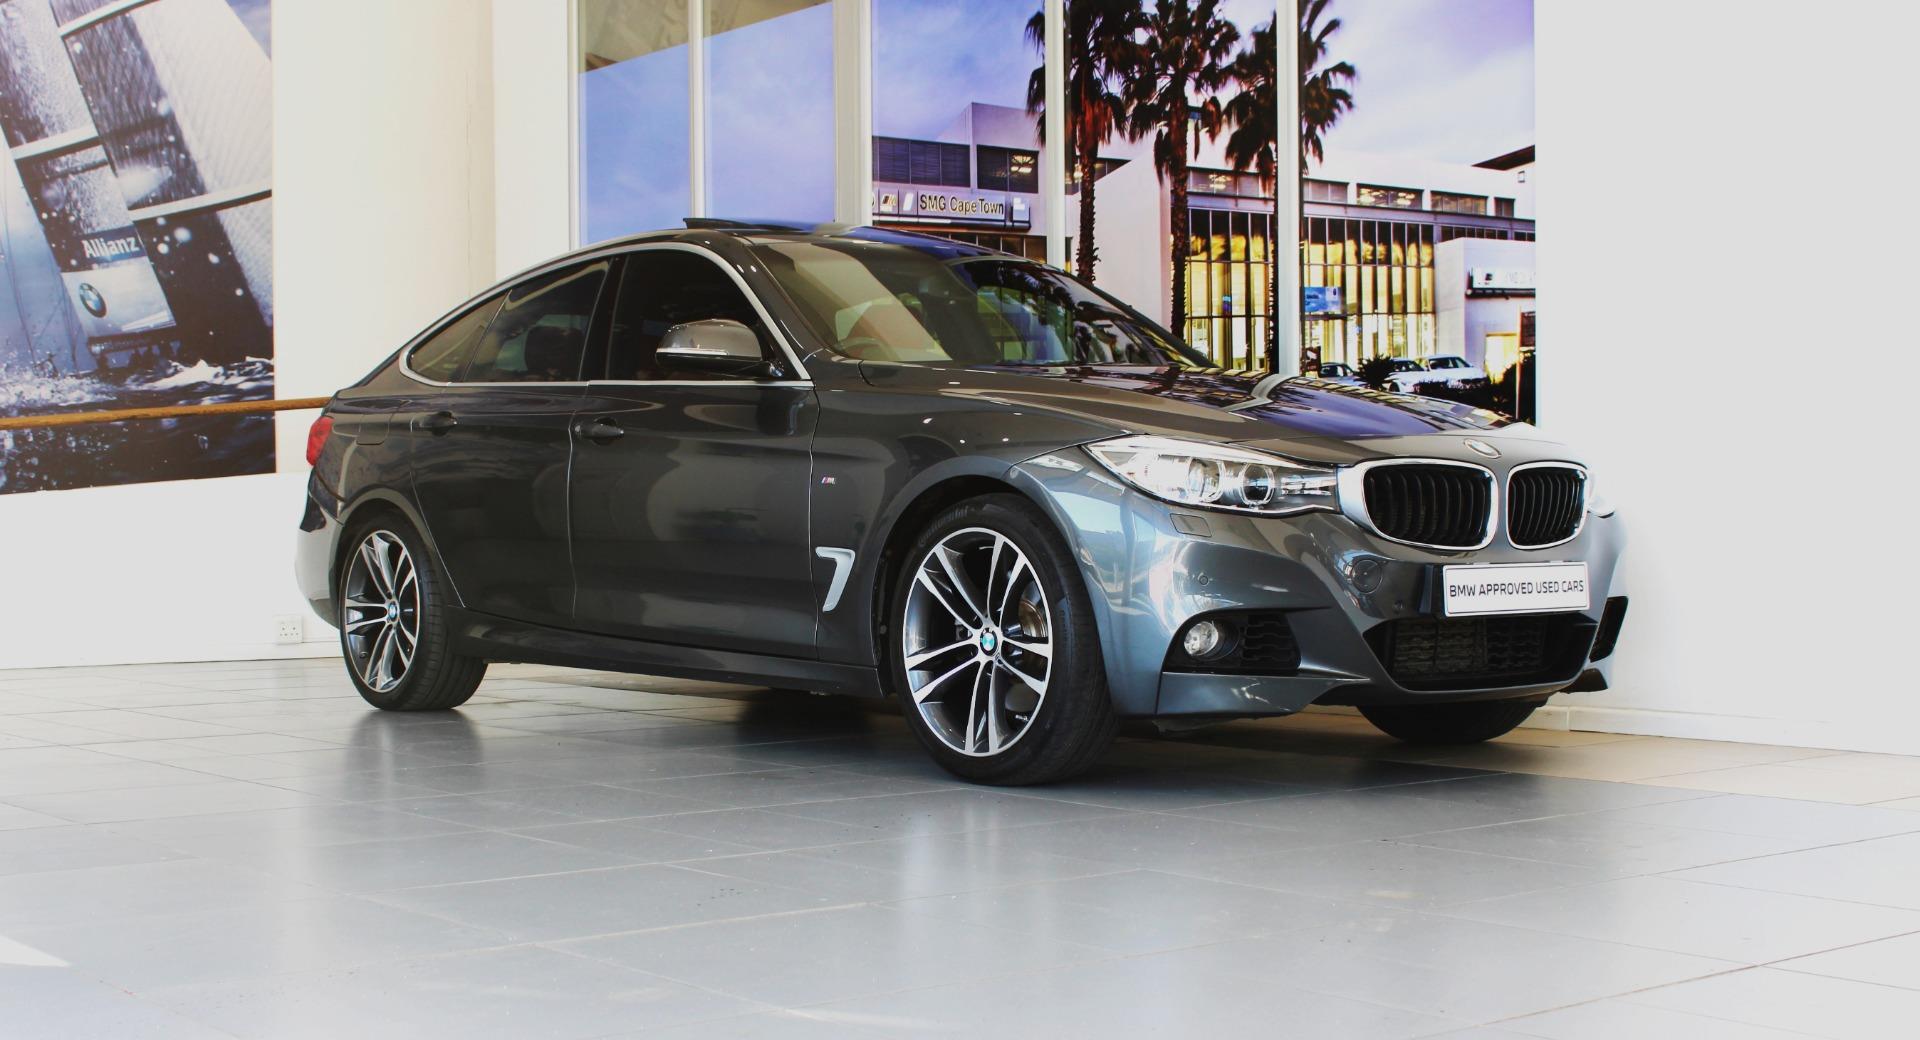 2016 BMW 328i GT M SPORT (F34)  for sale - SMG12|USED|115334